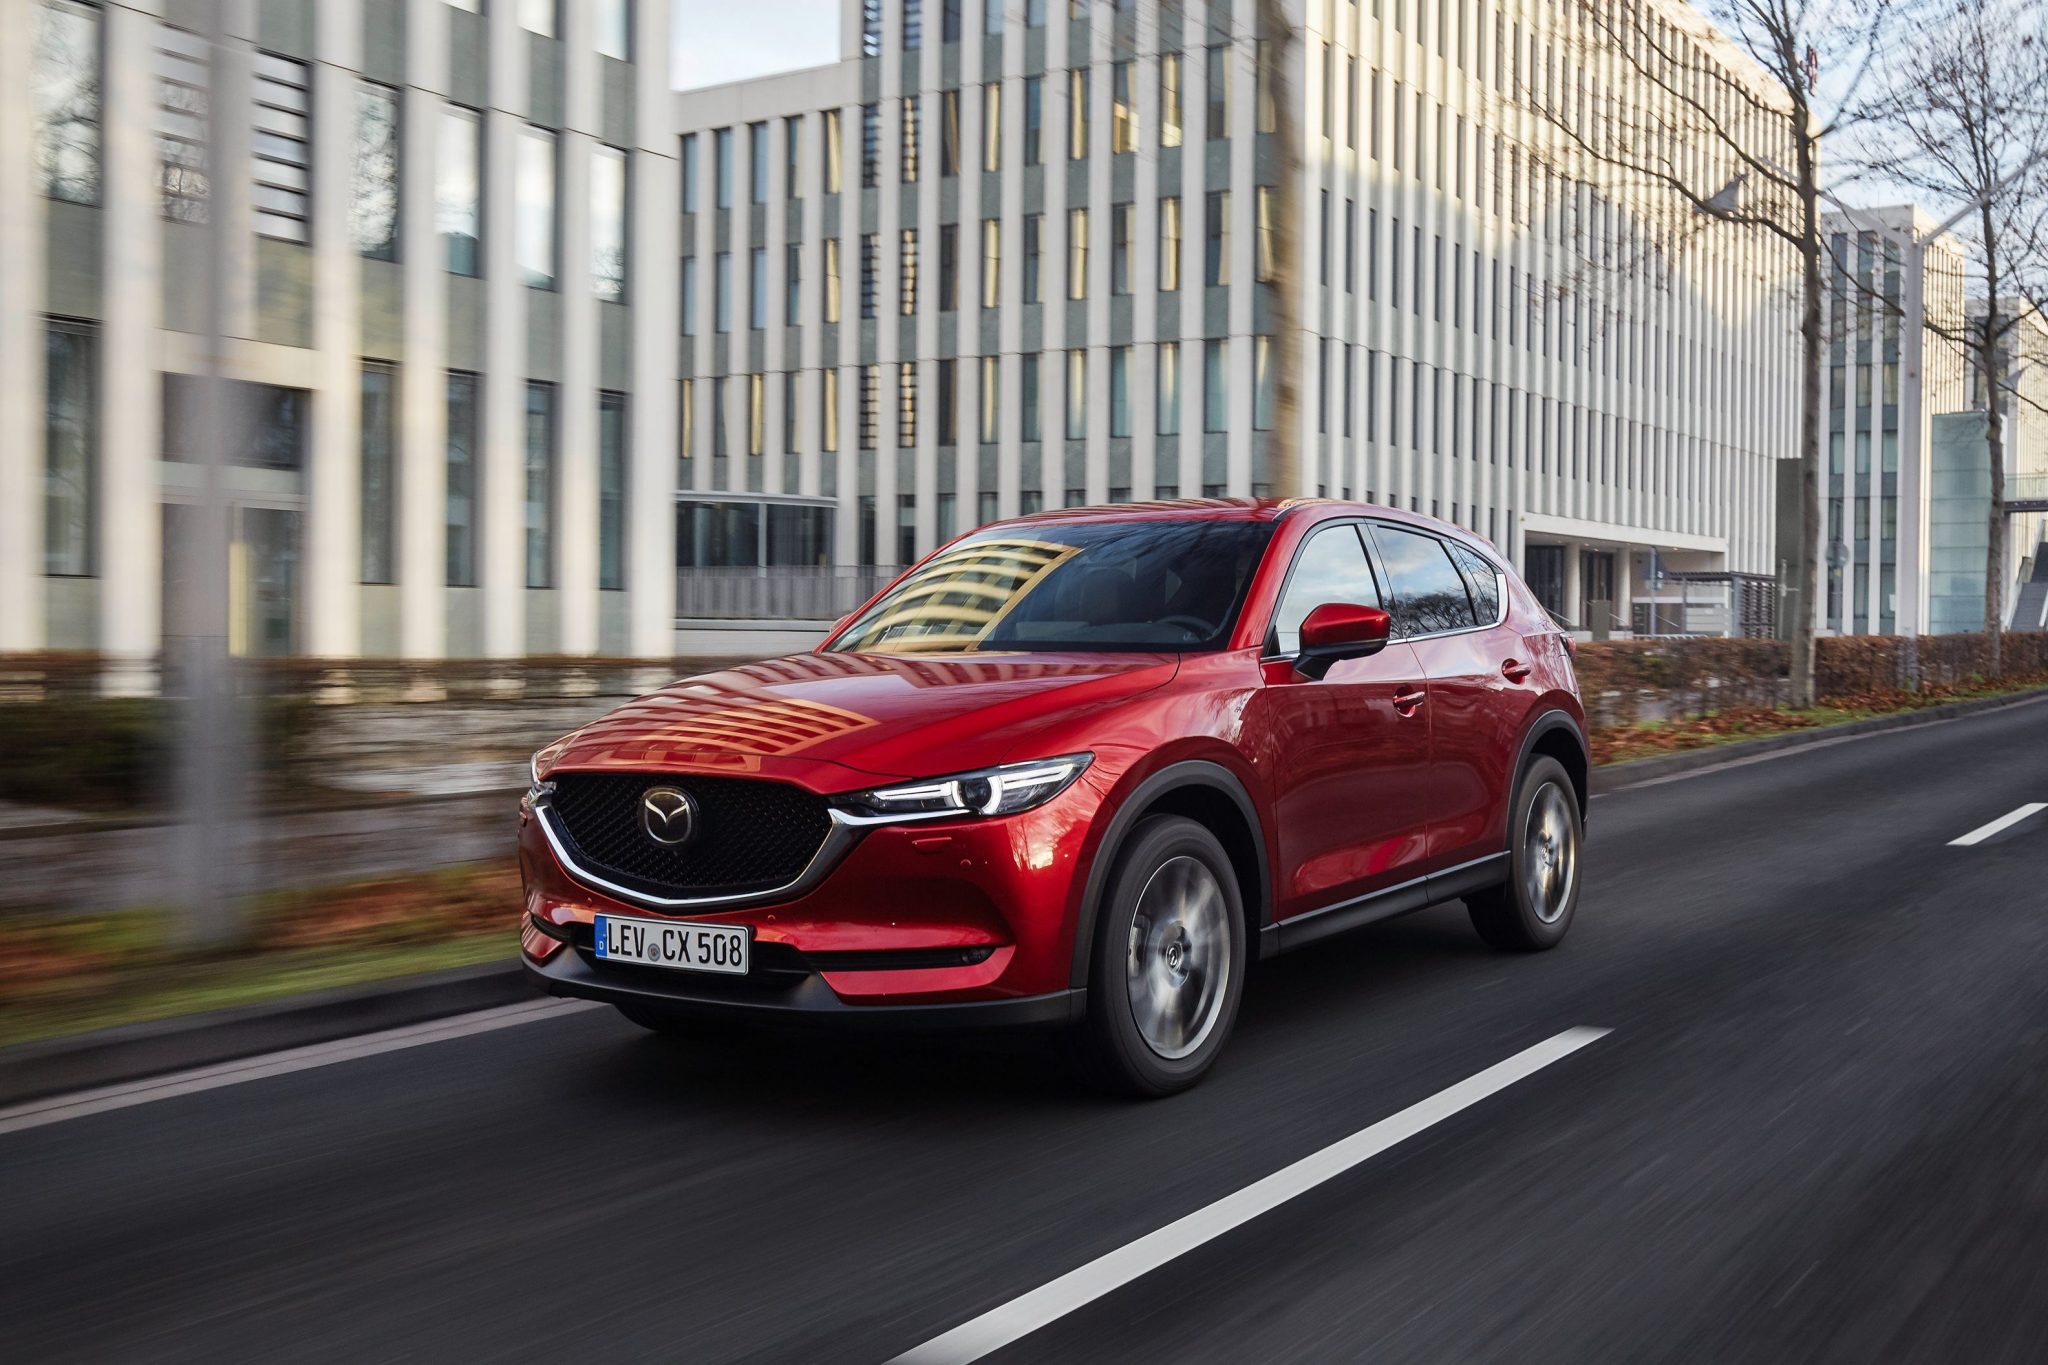 Mazda CX5 tops safety ratings SafeDriving.co.uk